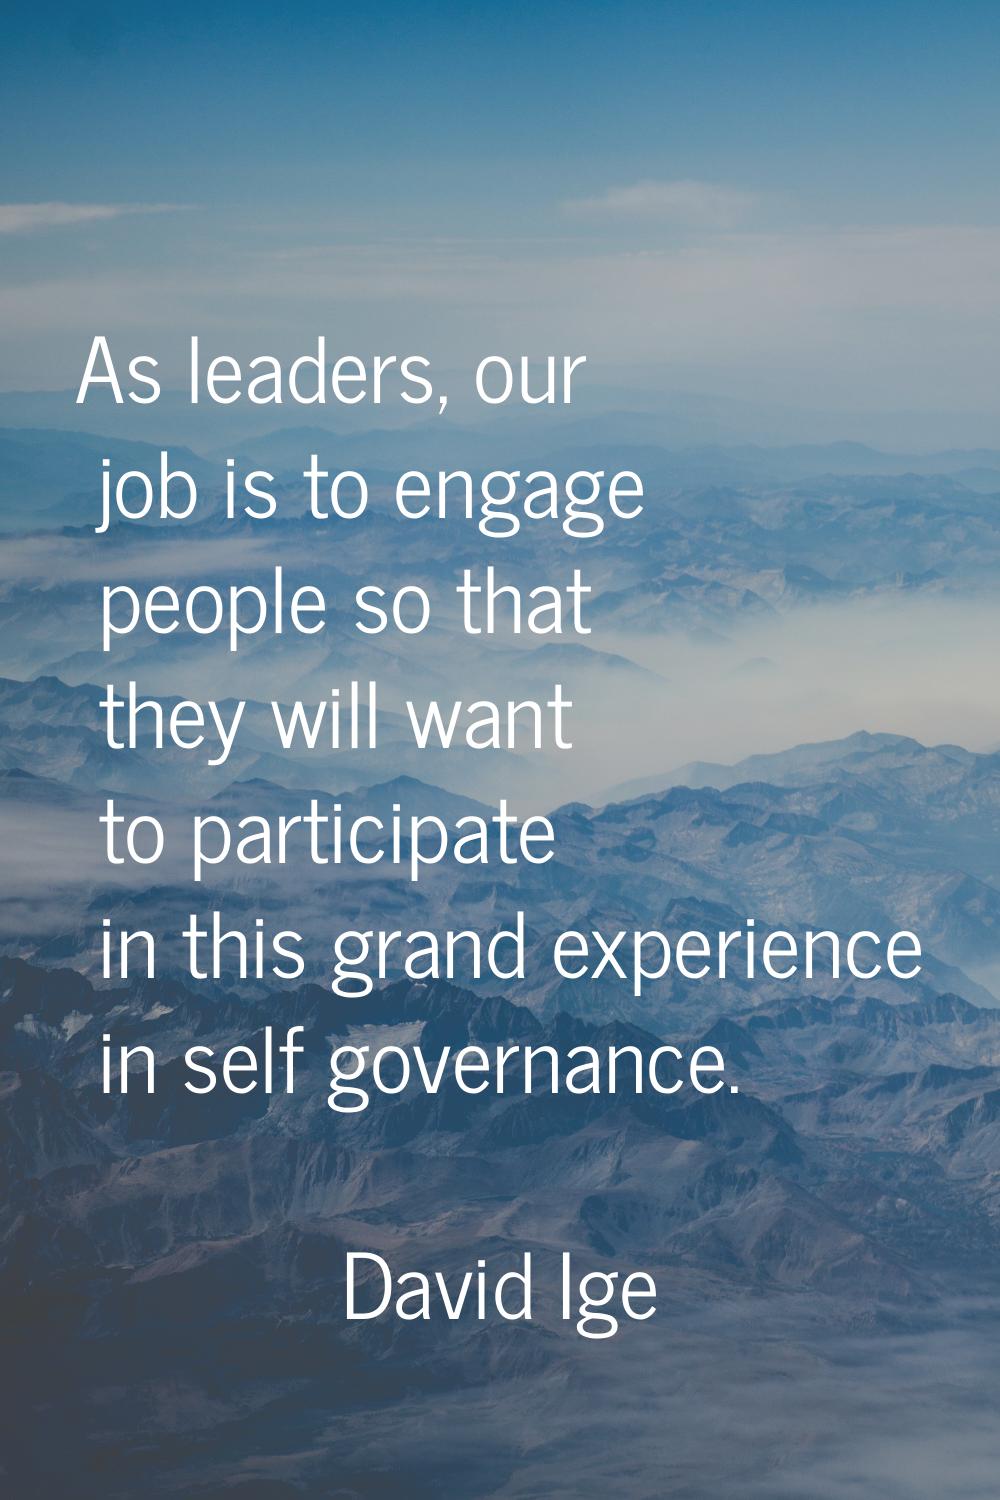 As leaders, our job is to engage people so that they will want to participate in this grand experie